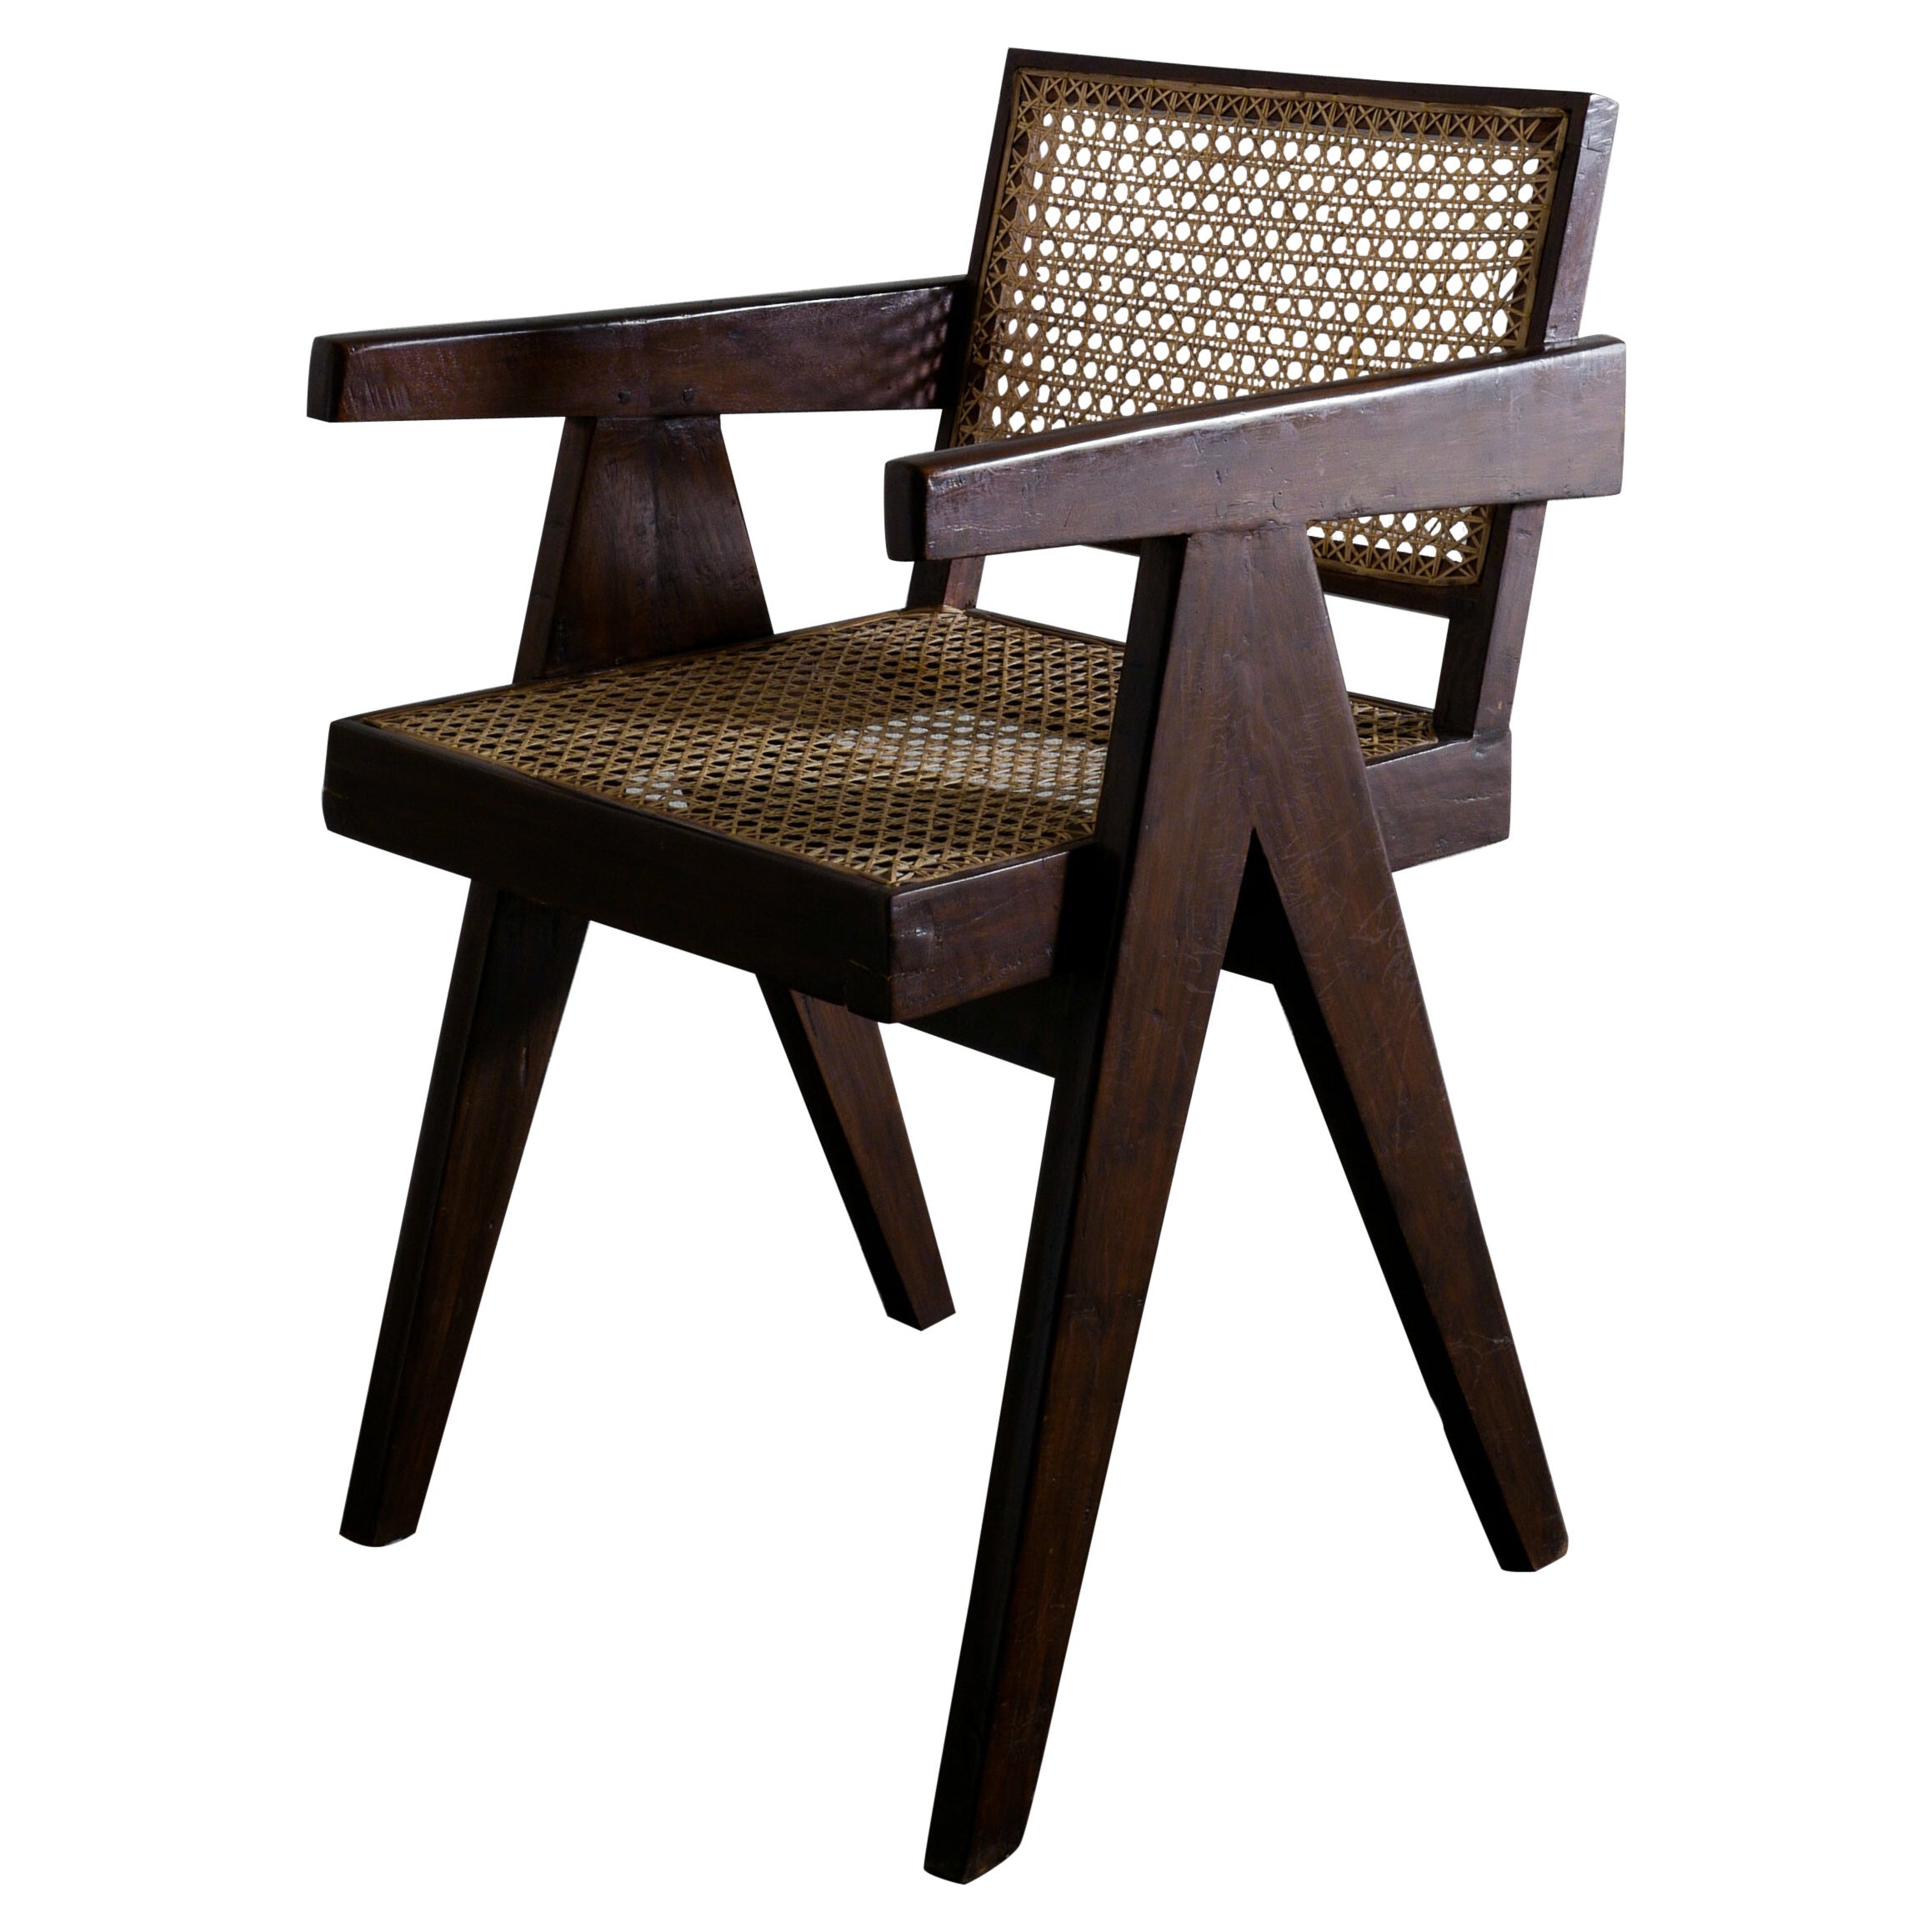 Pierre Jeanneret Teak Mid-Century "Office Chair" for Chandigarh, India, 1950s